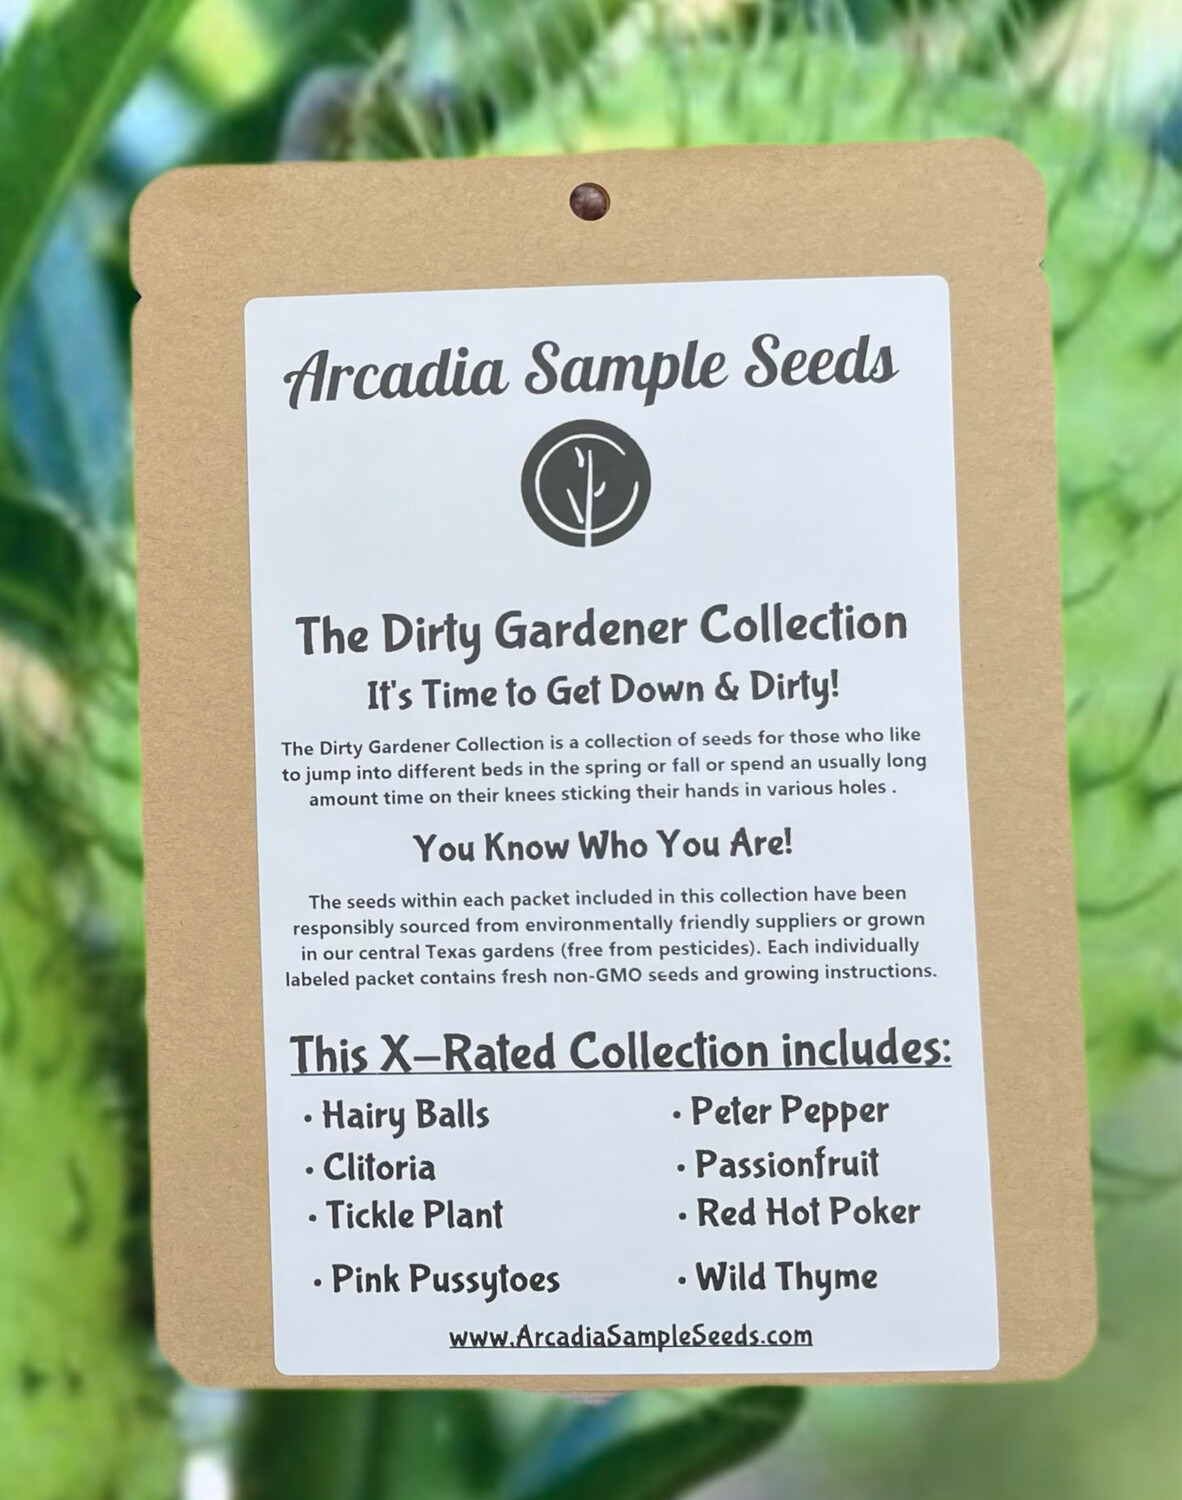 The Dirty Gardener Collection